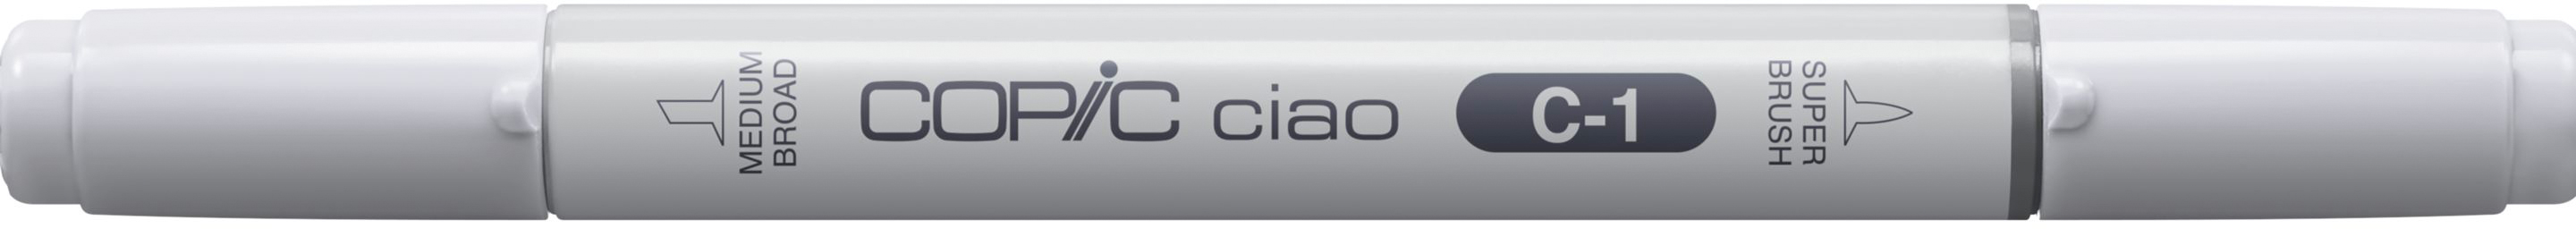 COPIC Marker Ciao 2207512 C-1 - Cool Grey No.1